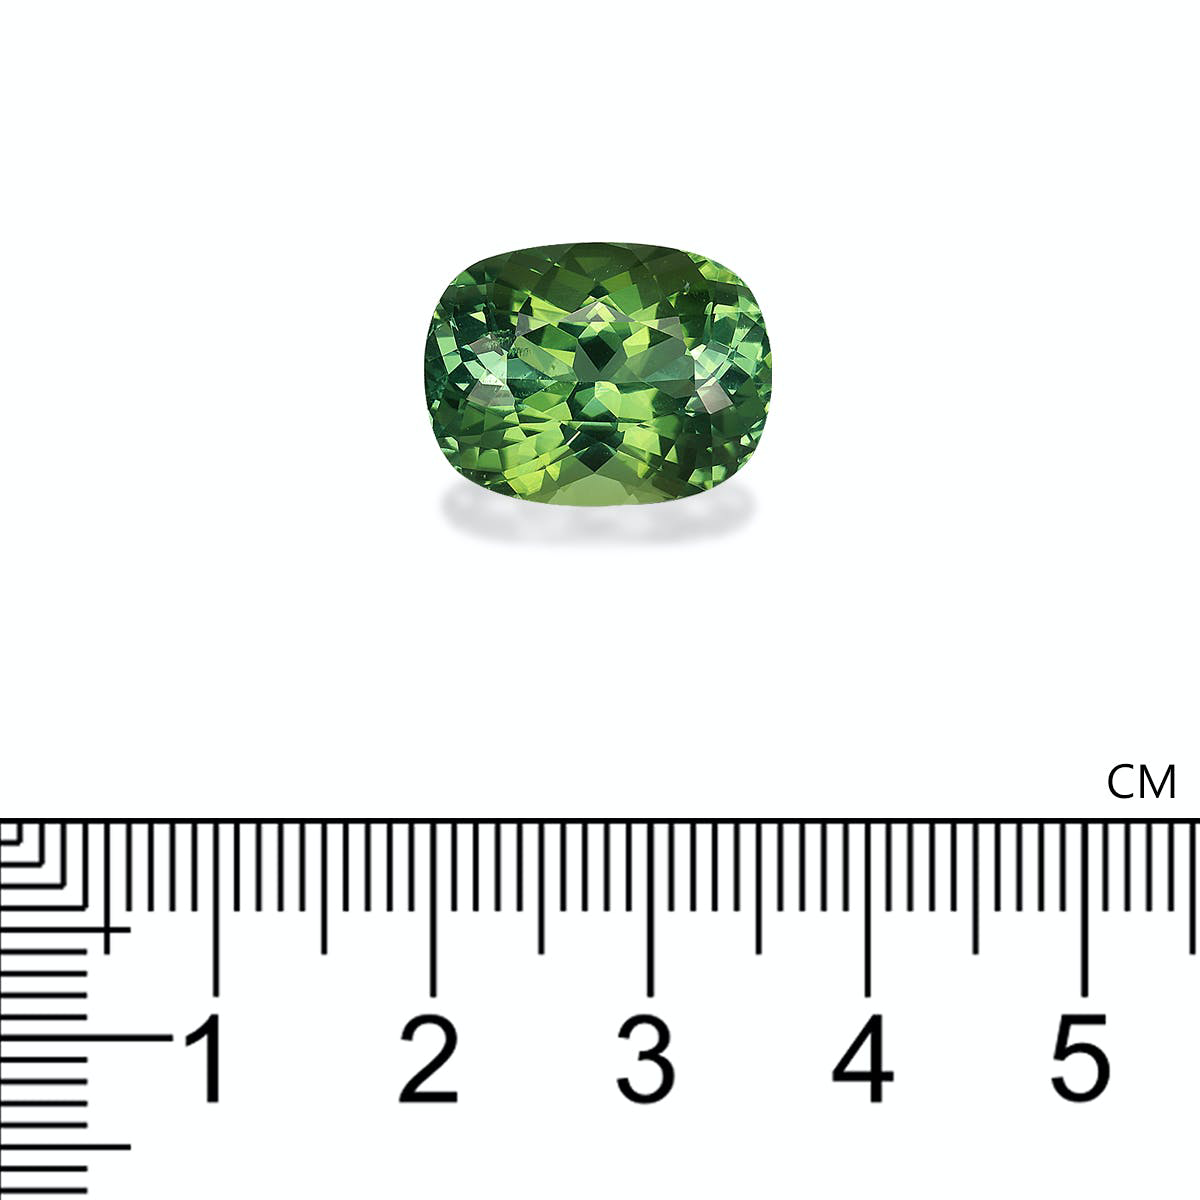 Picture of Cotton Green Tourmaline 12.20ct (TG0651)